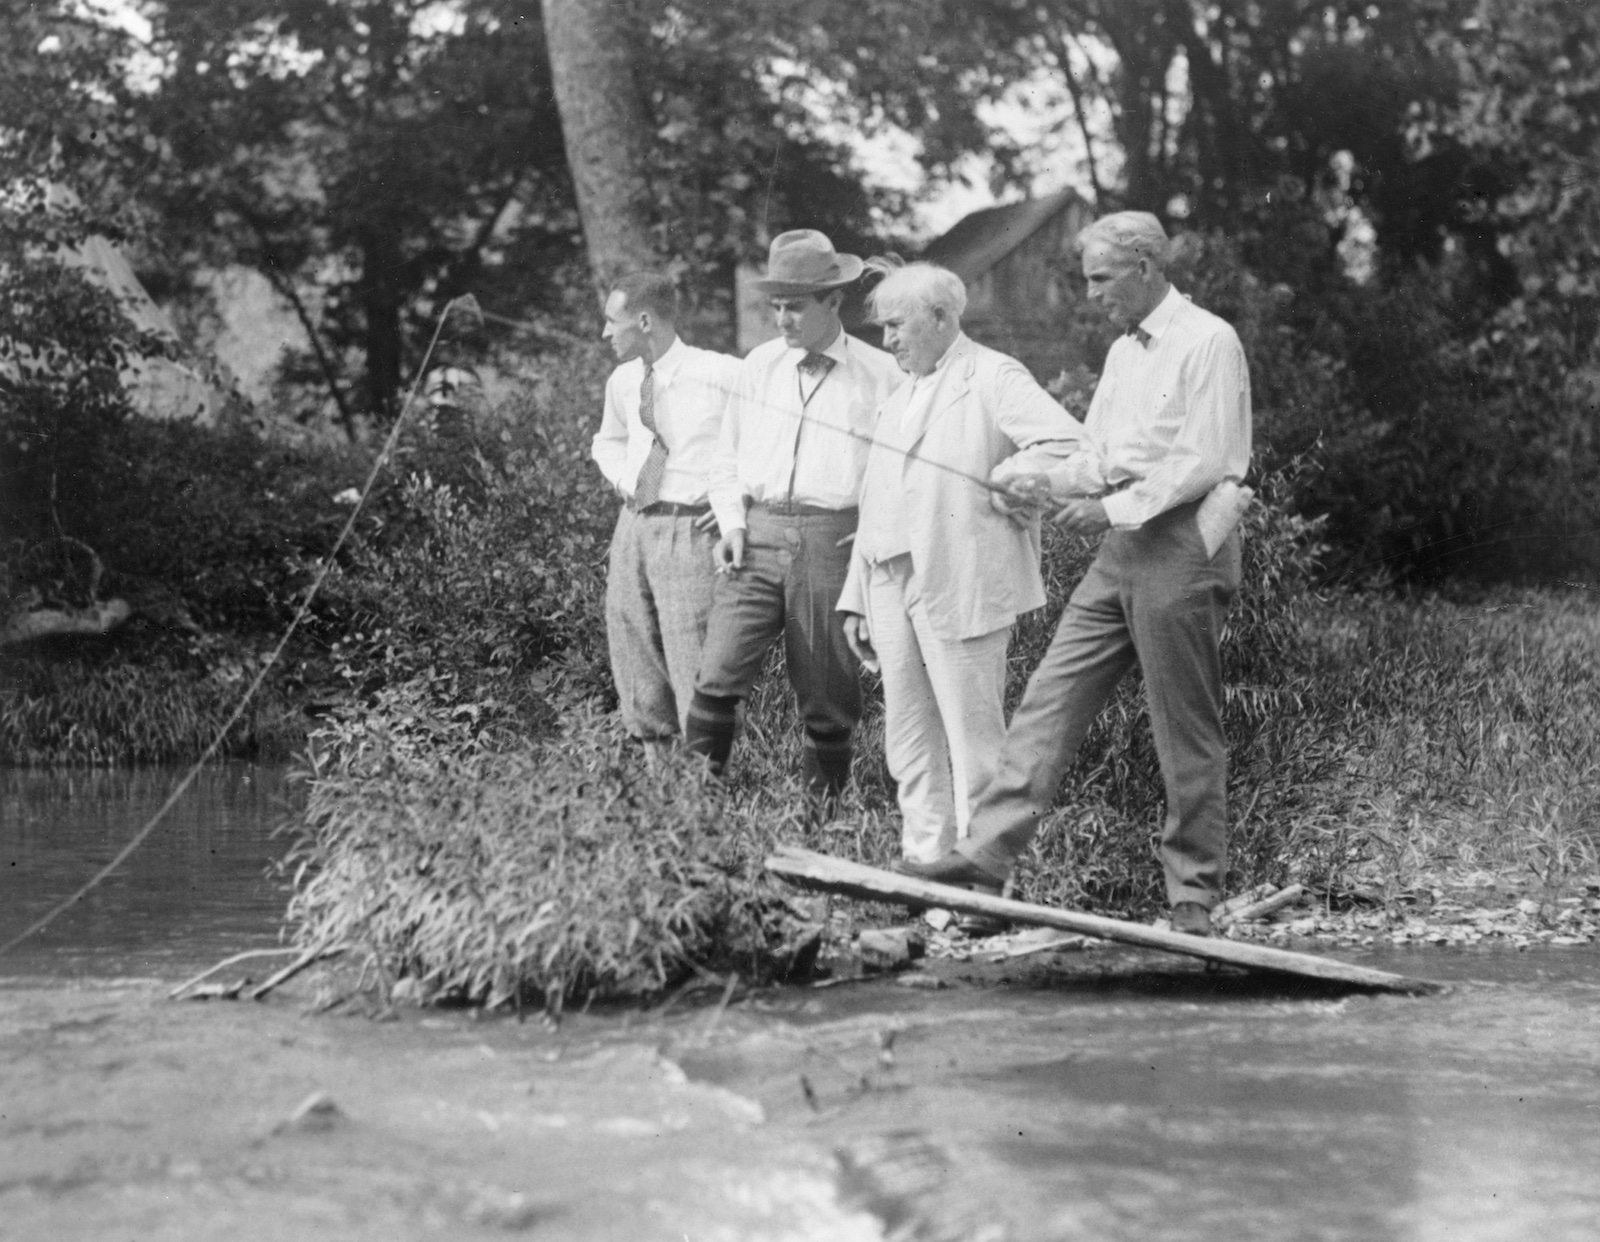 Henry Ford fishing with Harvey Firestone, George Christian and Thomas Edison, C. 1920. Library of Congress. Public Domain.